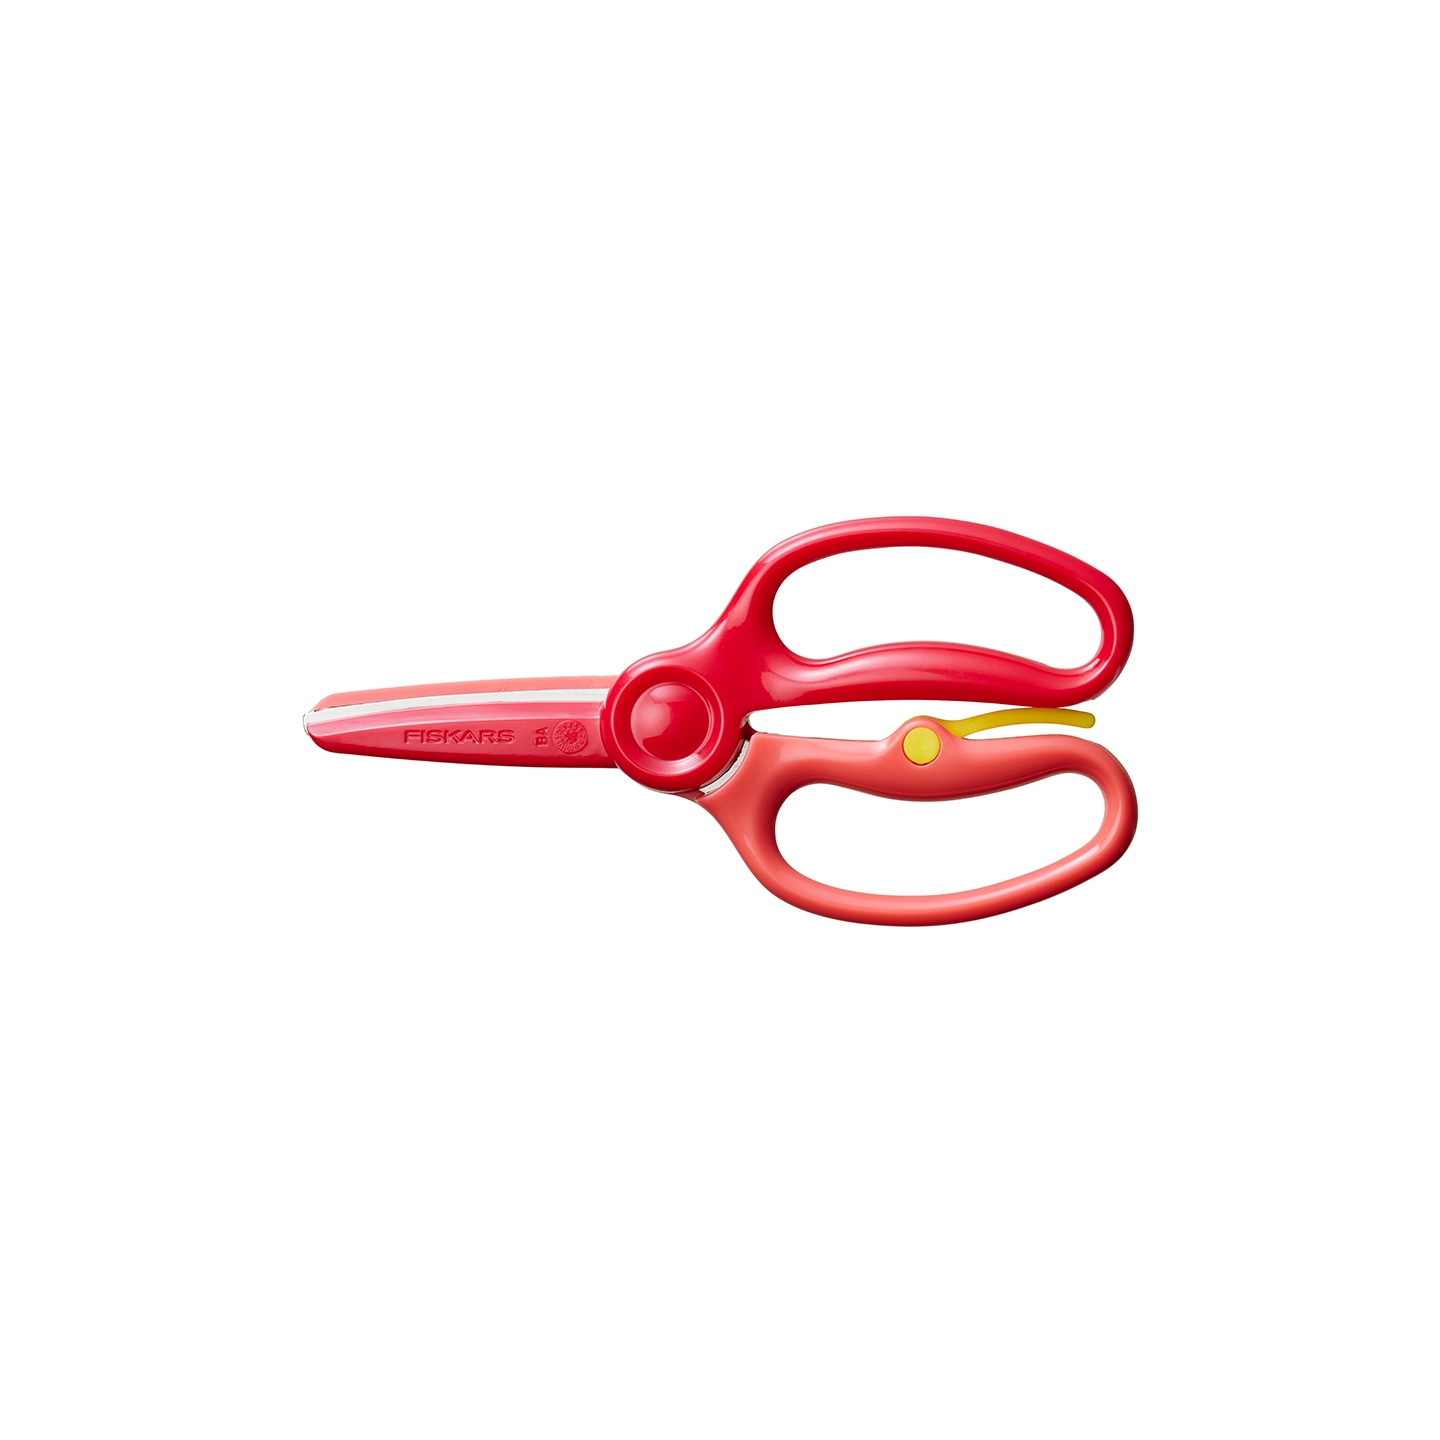 Fiskars Spring Action Preschool Scissors, 5 Inches, Red and Blue